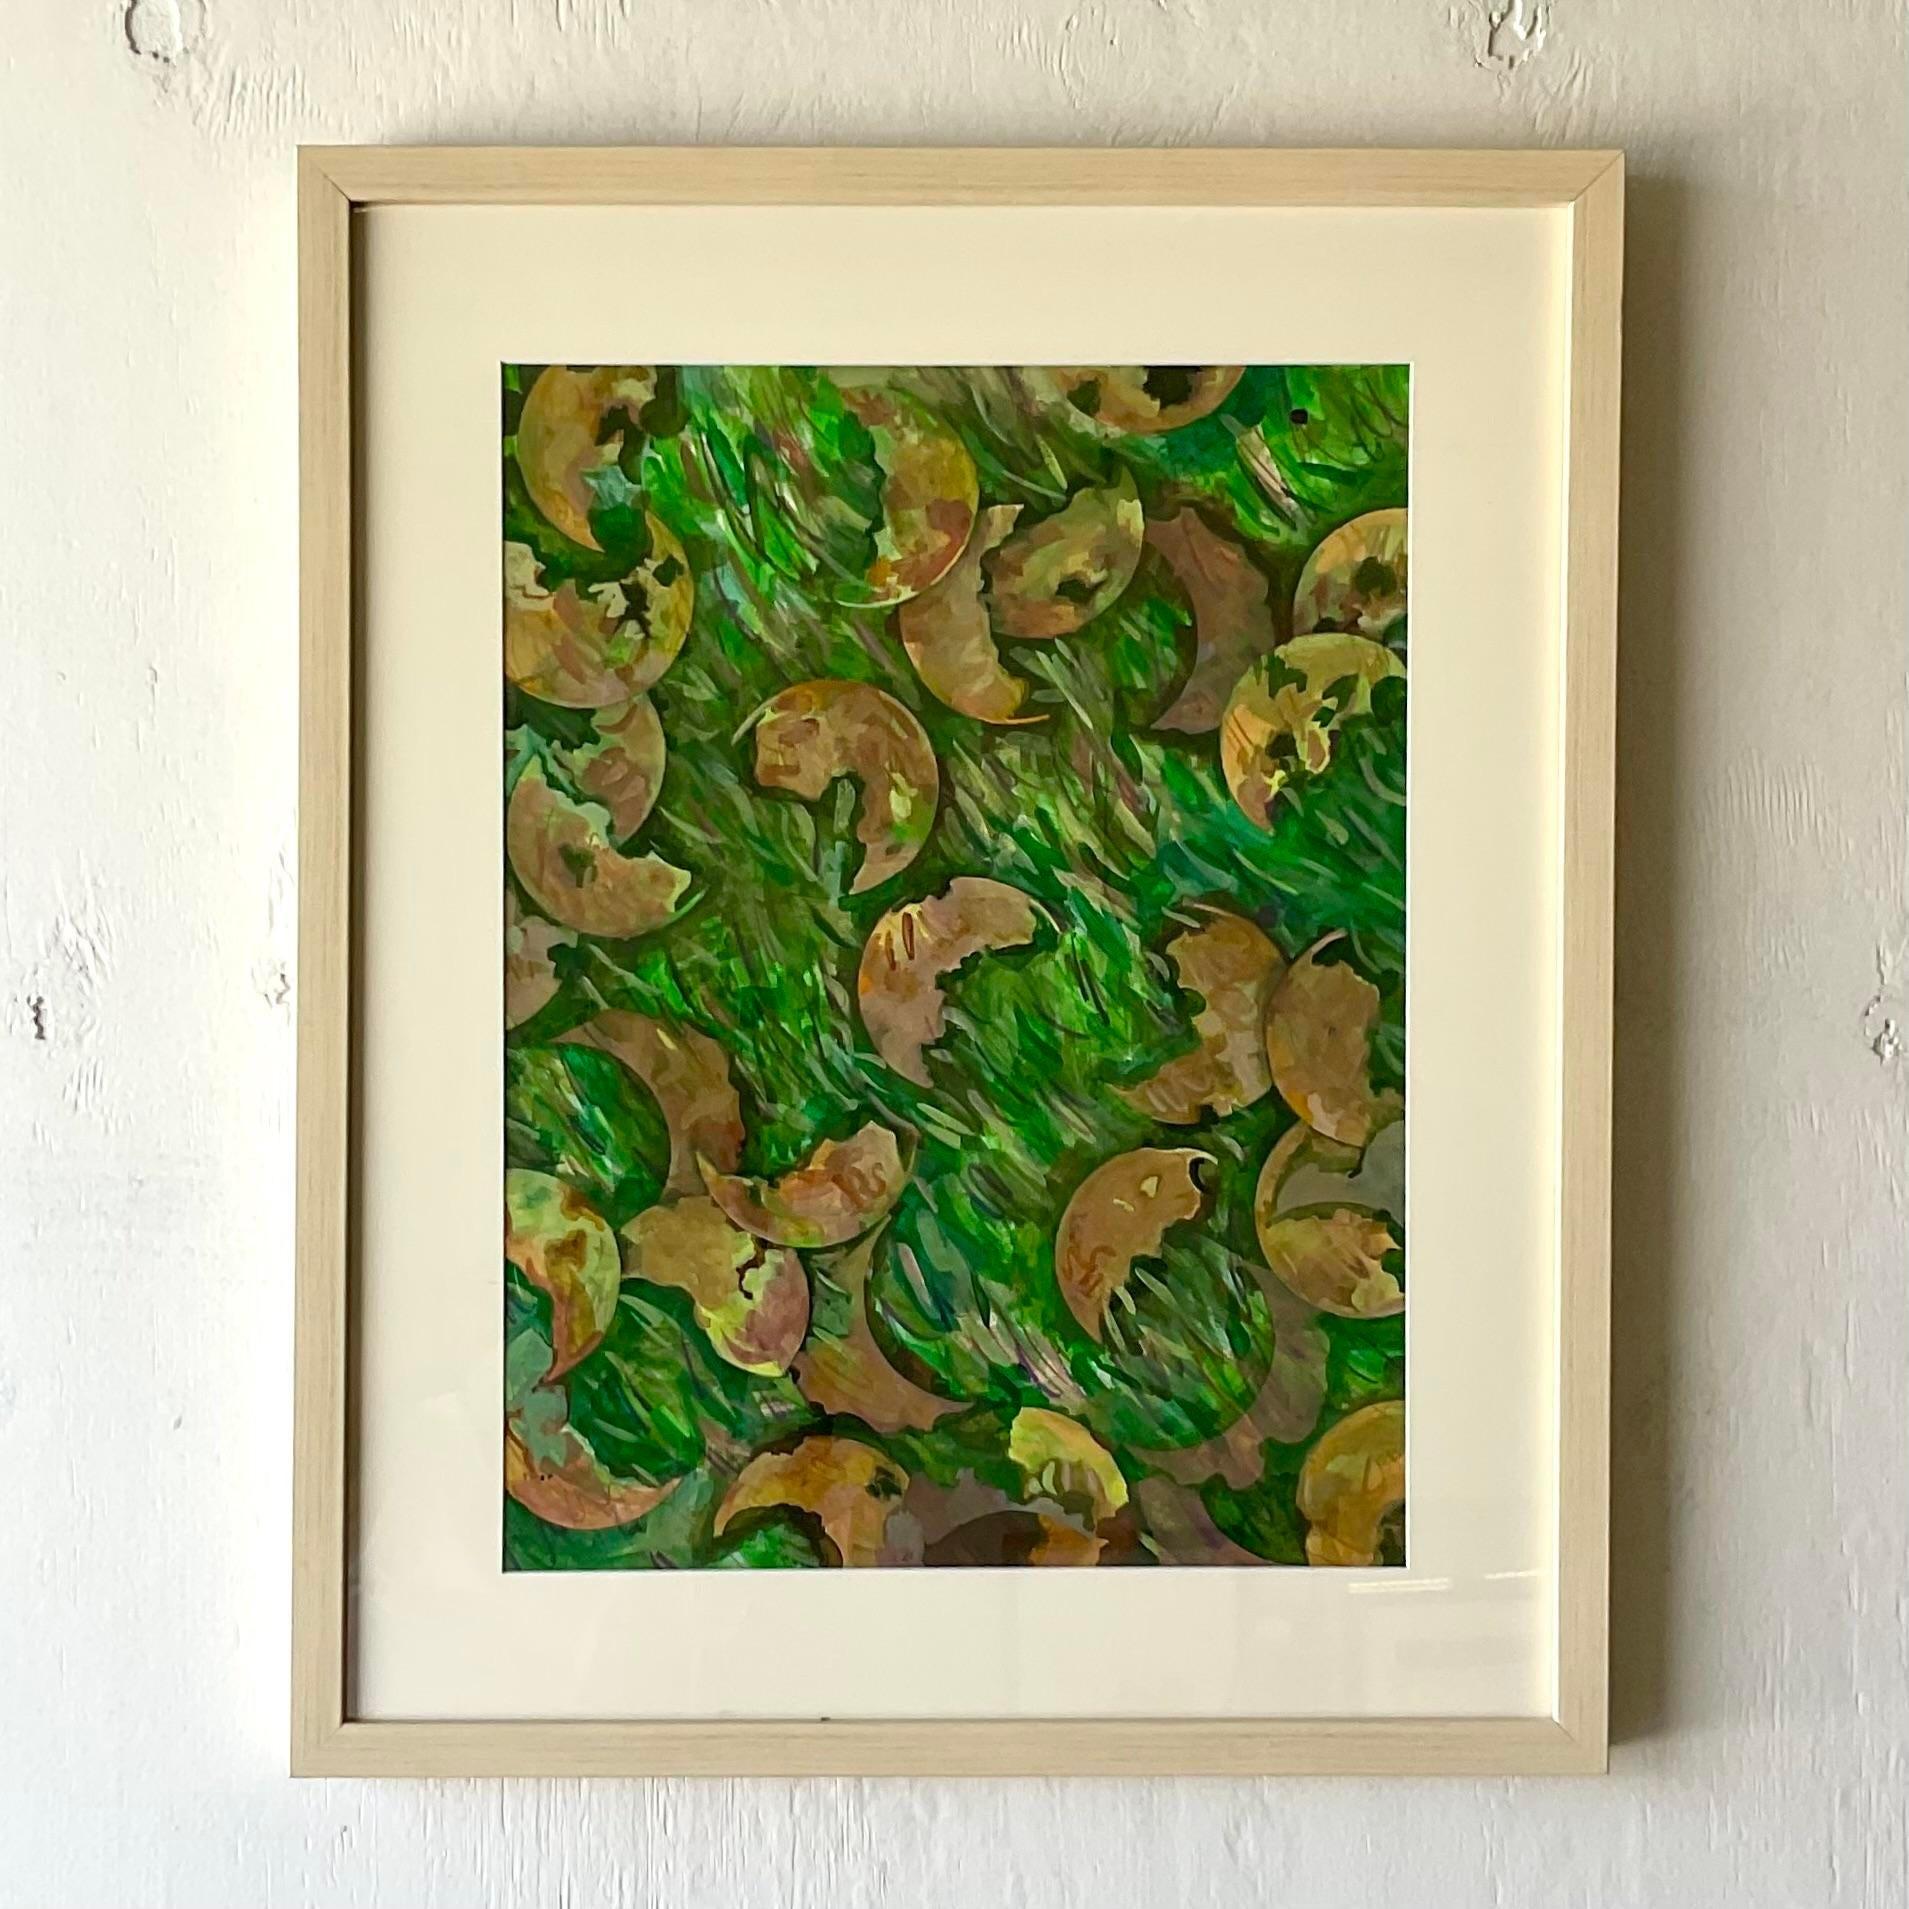 A fabulous vintage Boho original oil painting. Done by the collected artist Joe Davoli. Beautiful bright greens in a high energy composition. Newly framed. Acquired from a Palm Beach estate. 